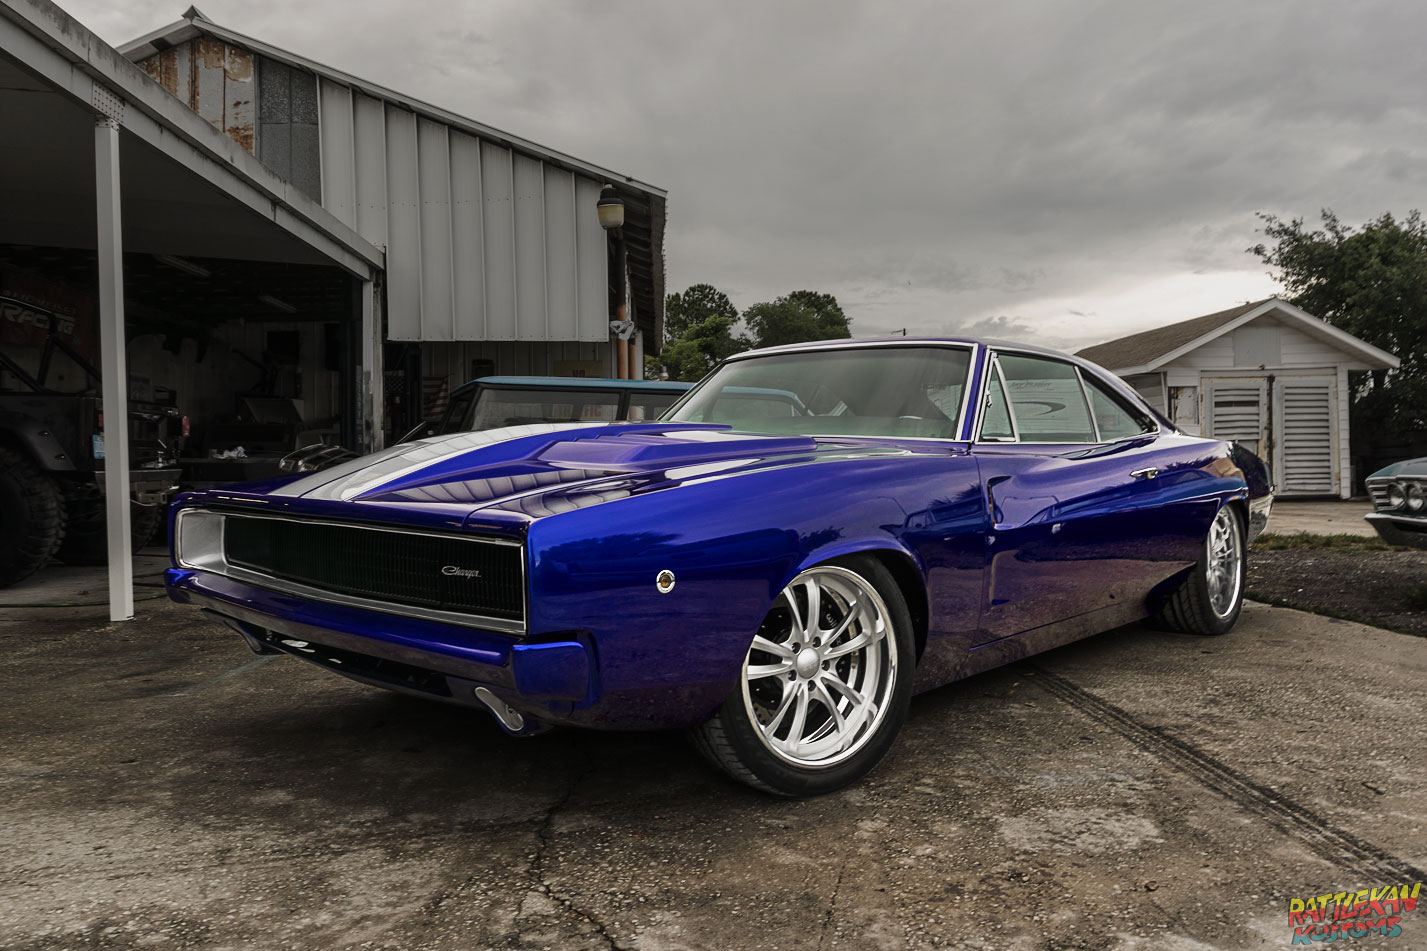 Dodge Charger painted by RattleKan Kustoms in Melbourne FL